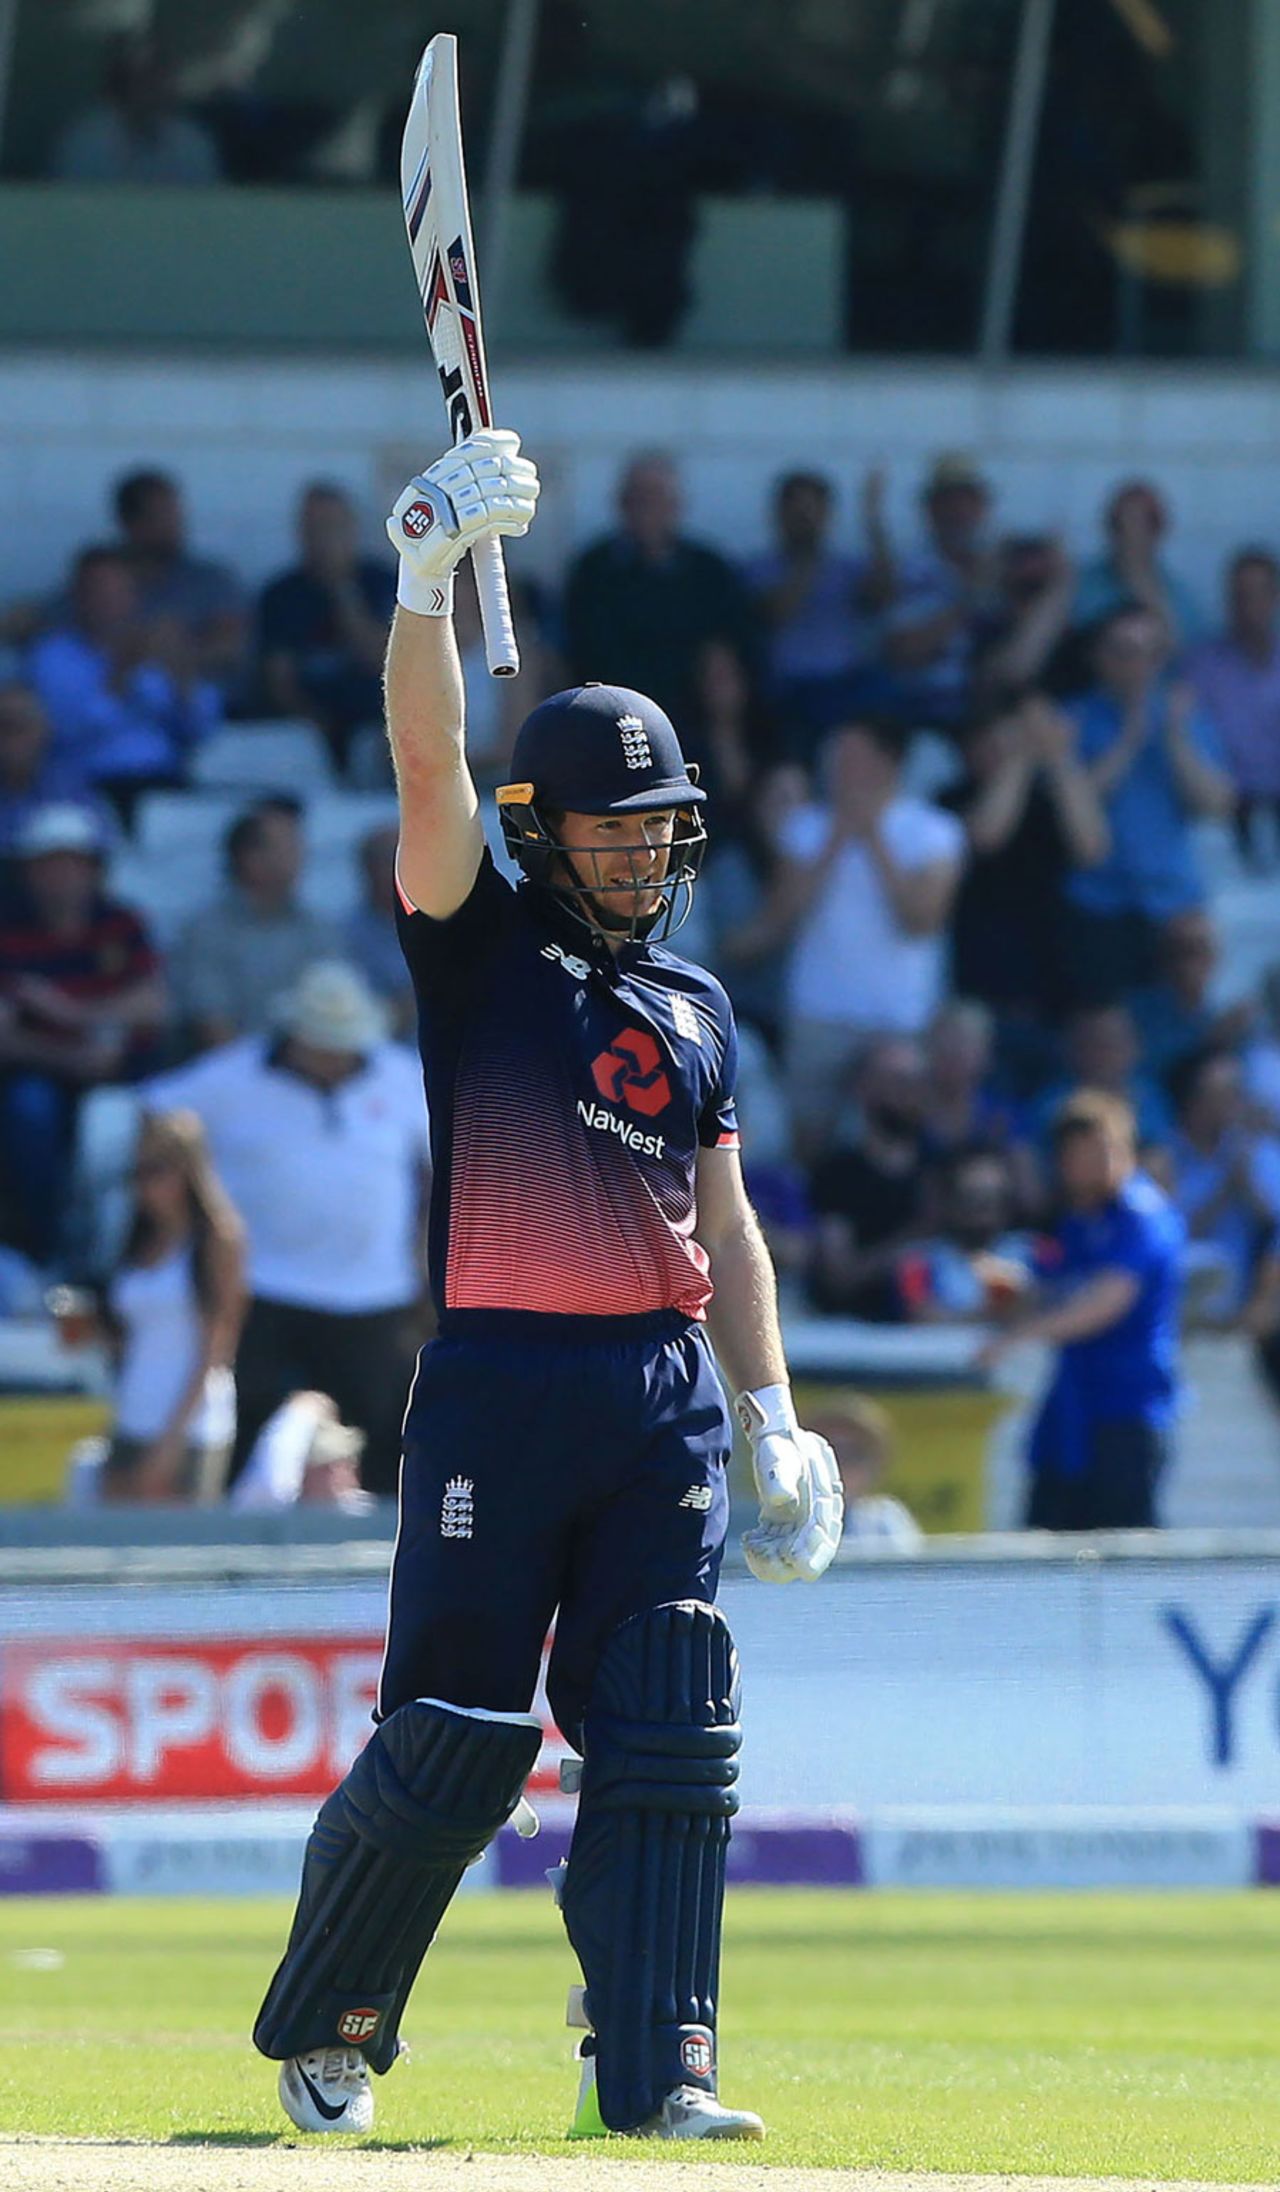 Eoin Morgan went past 50 for the second ODI in a row, England v South Africa, 1st ODI, Headingley, May 24, 2017